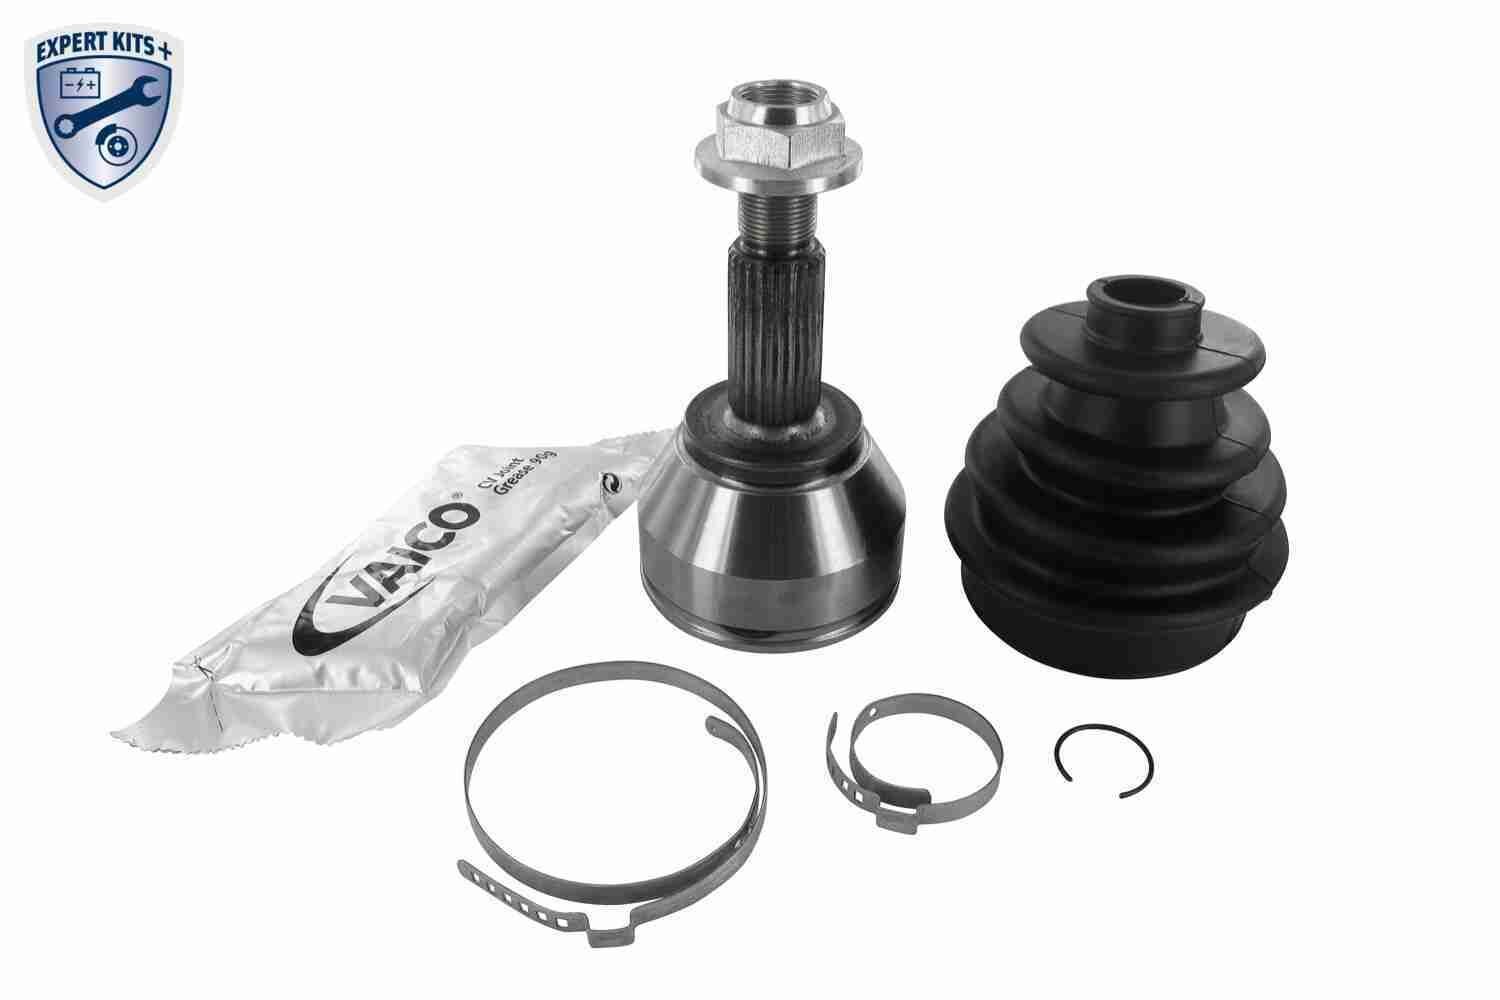 VAICO V25-0504 Joint kit, drive shaft EXPERT KITS +, Wheel Side, without ABS ring